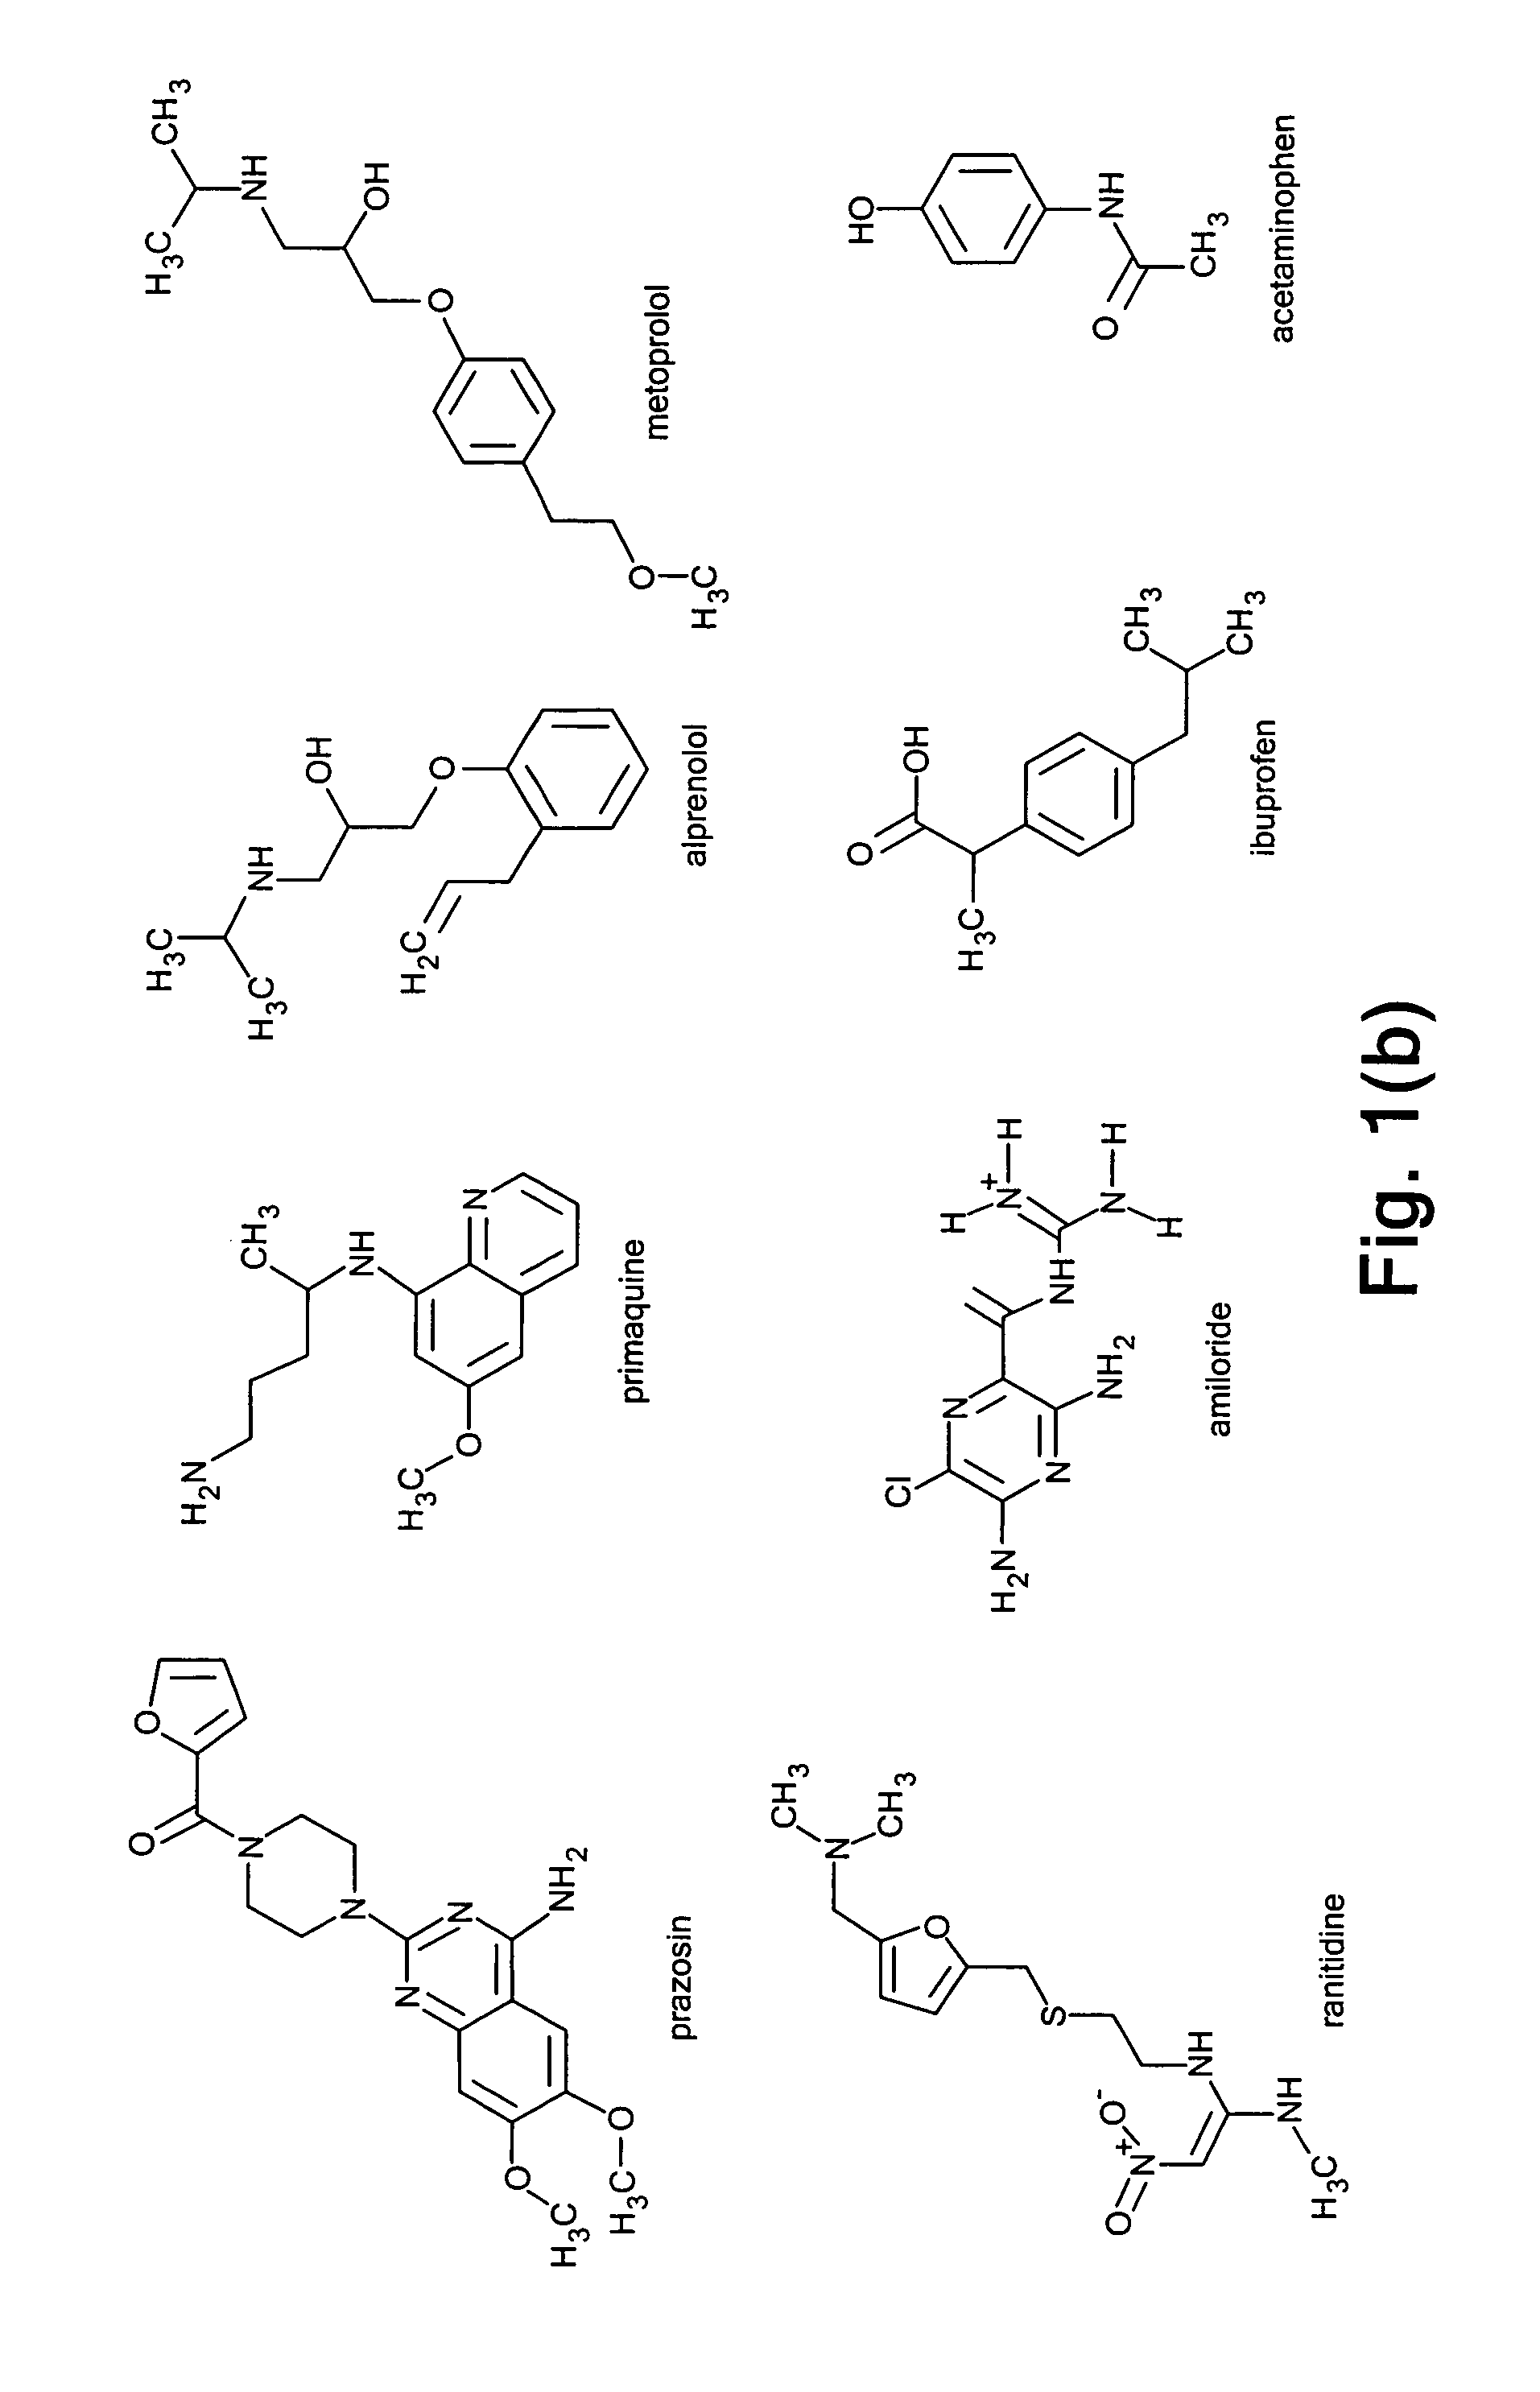 Method and apparatus for improving in vitro measurement of membrane permeability of chemical compounds